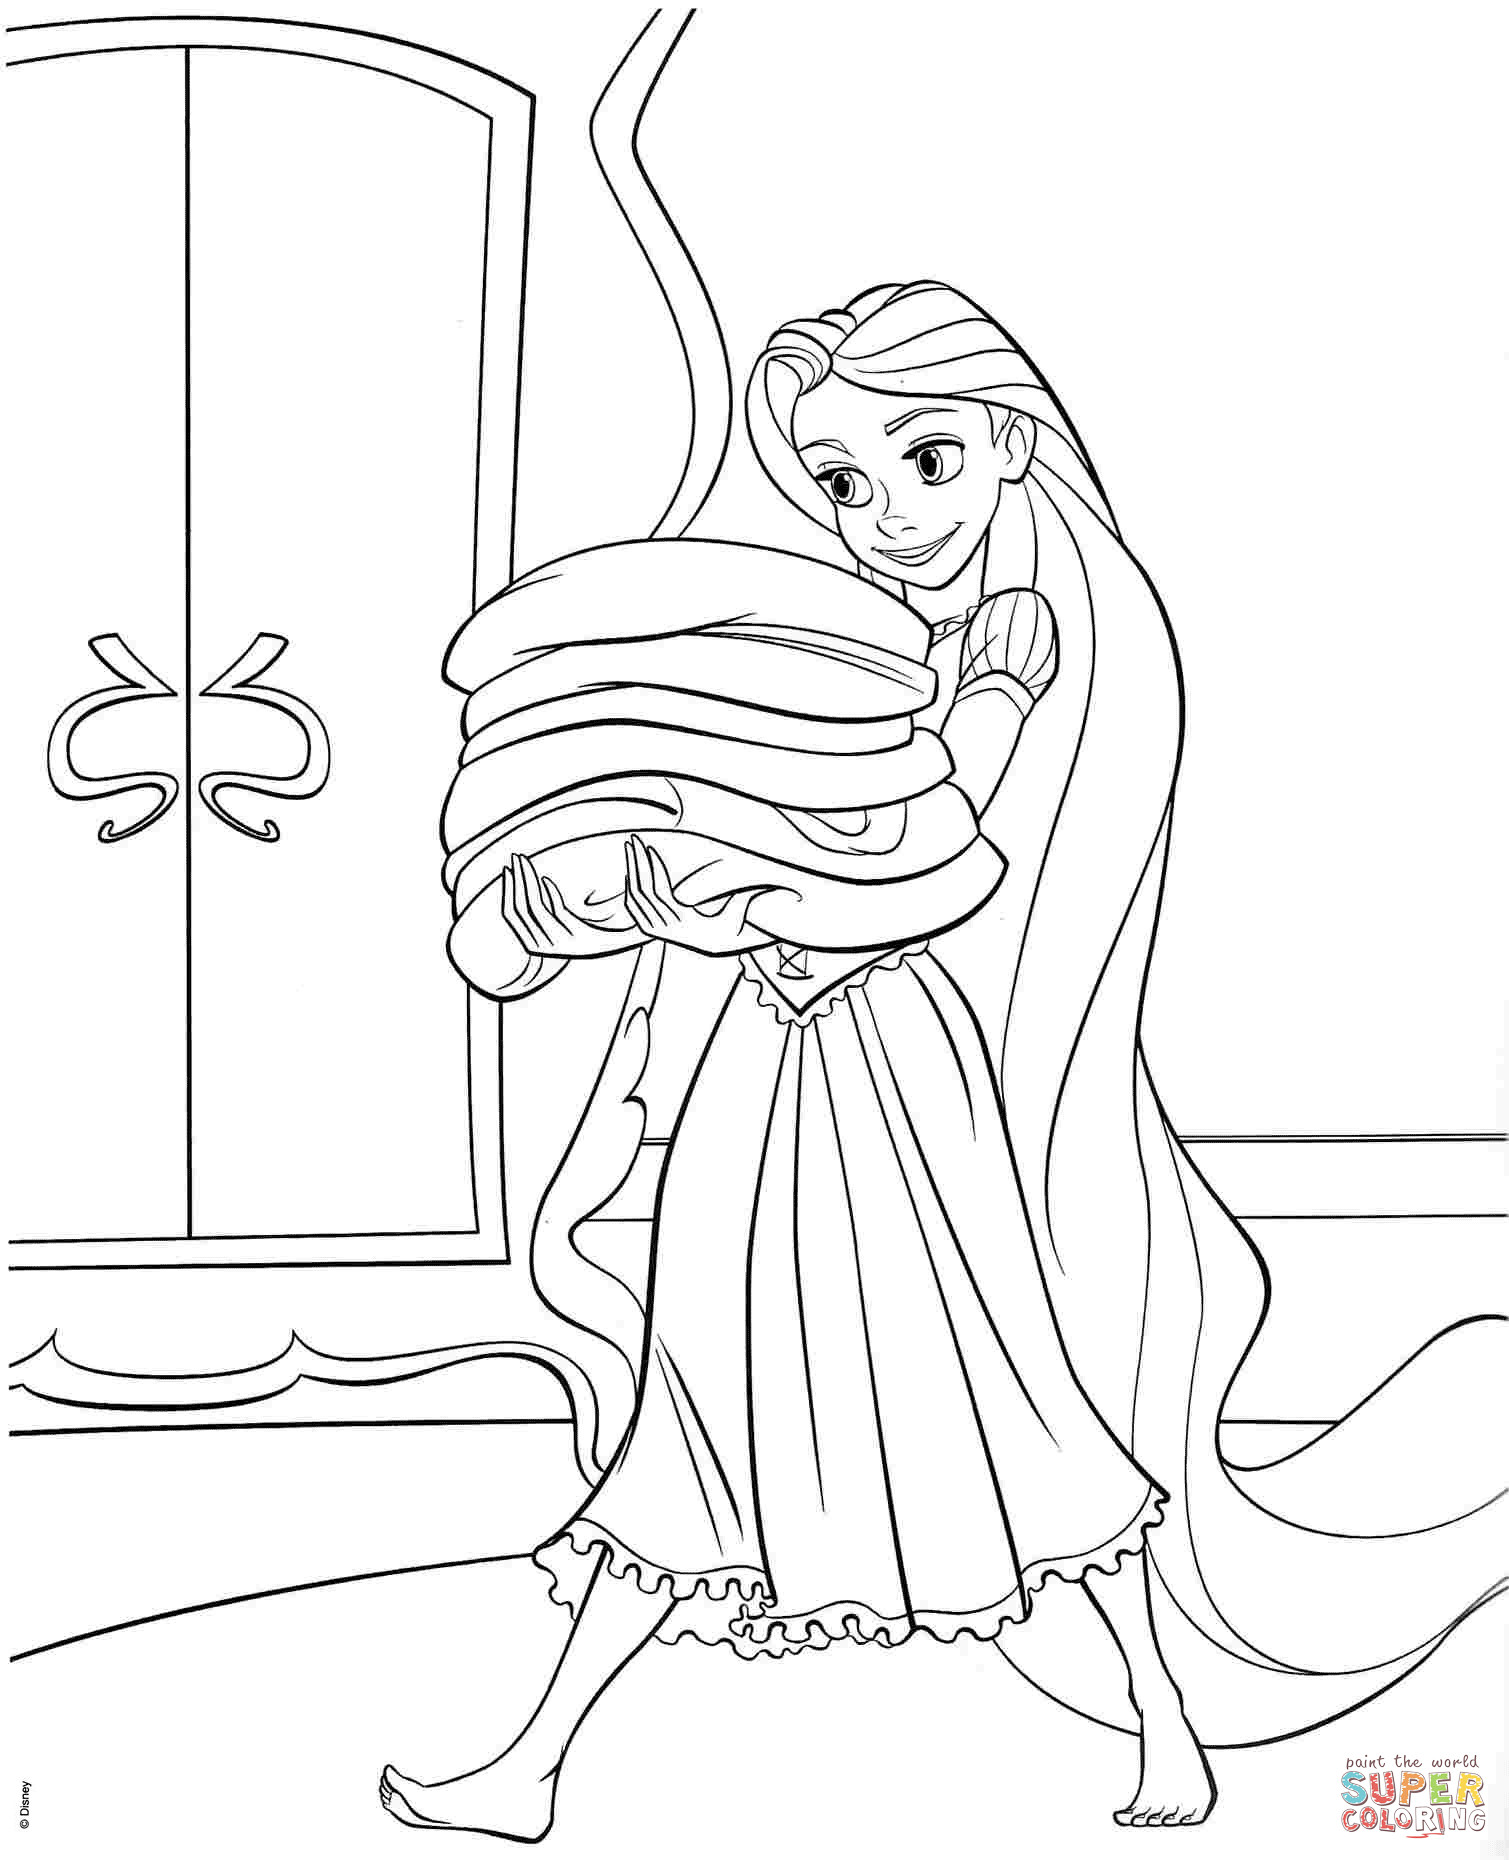 Rapunzel Printable Coloring Pages
 Tangled Rapunzel coloring page